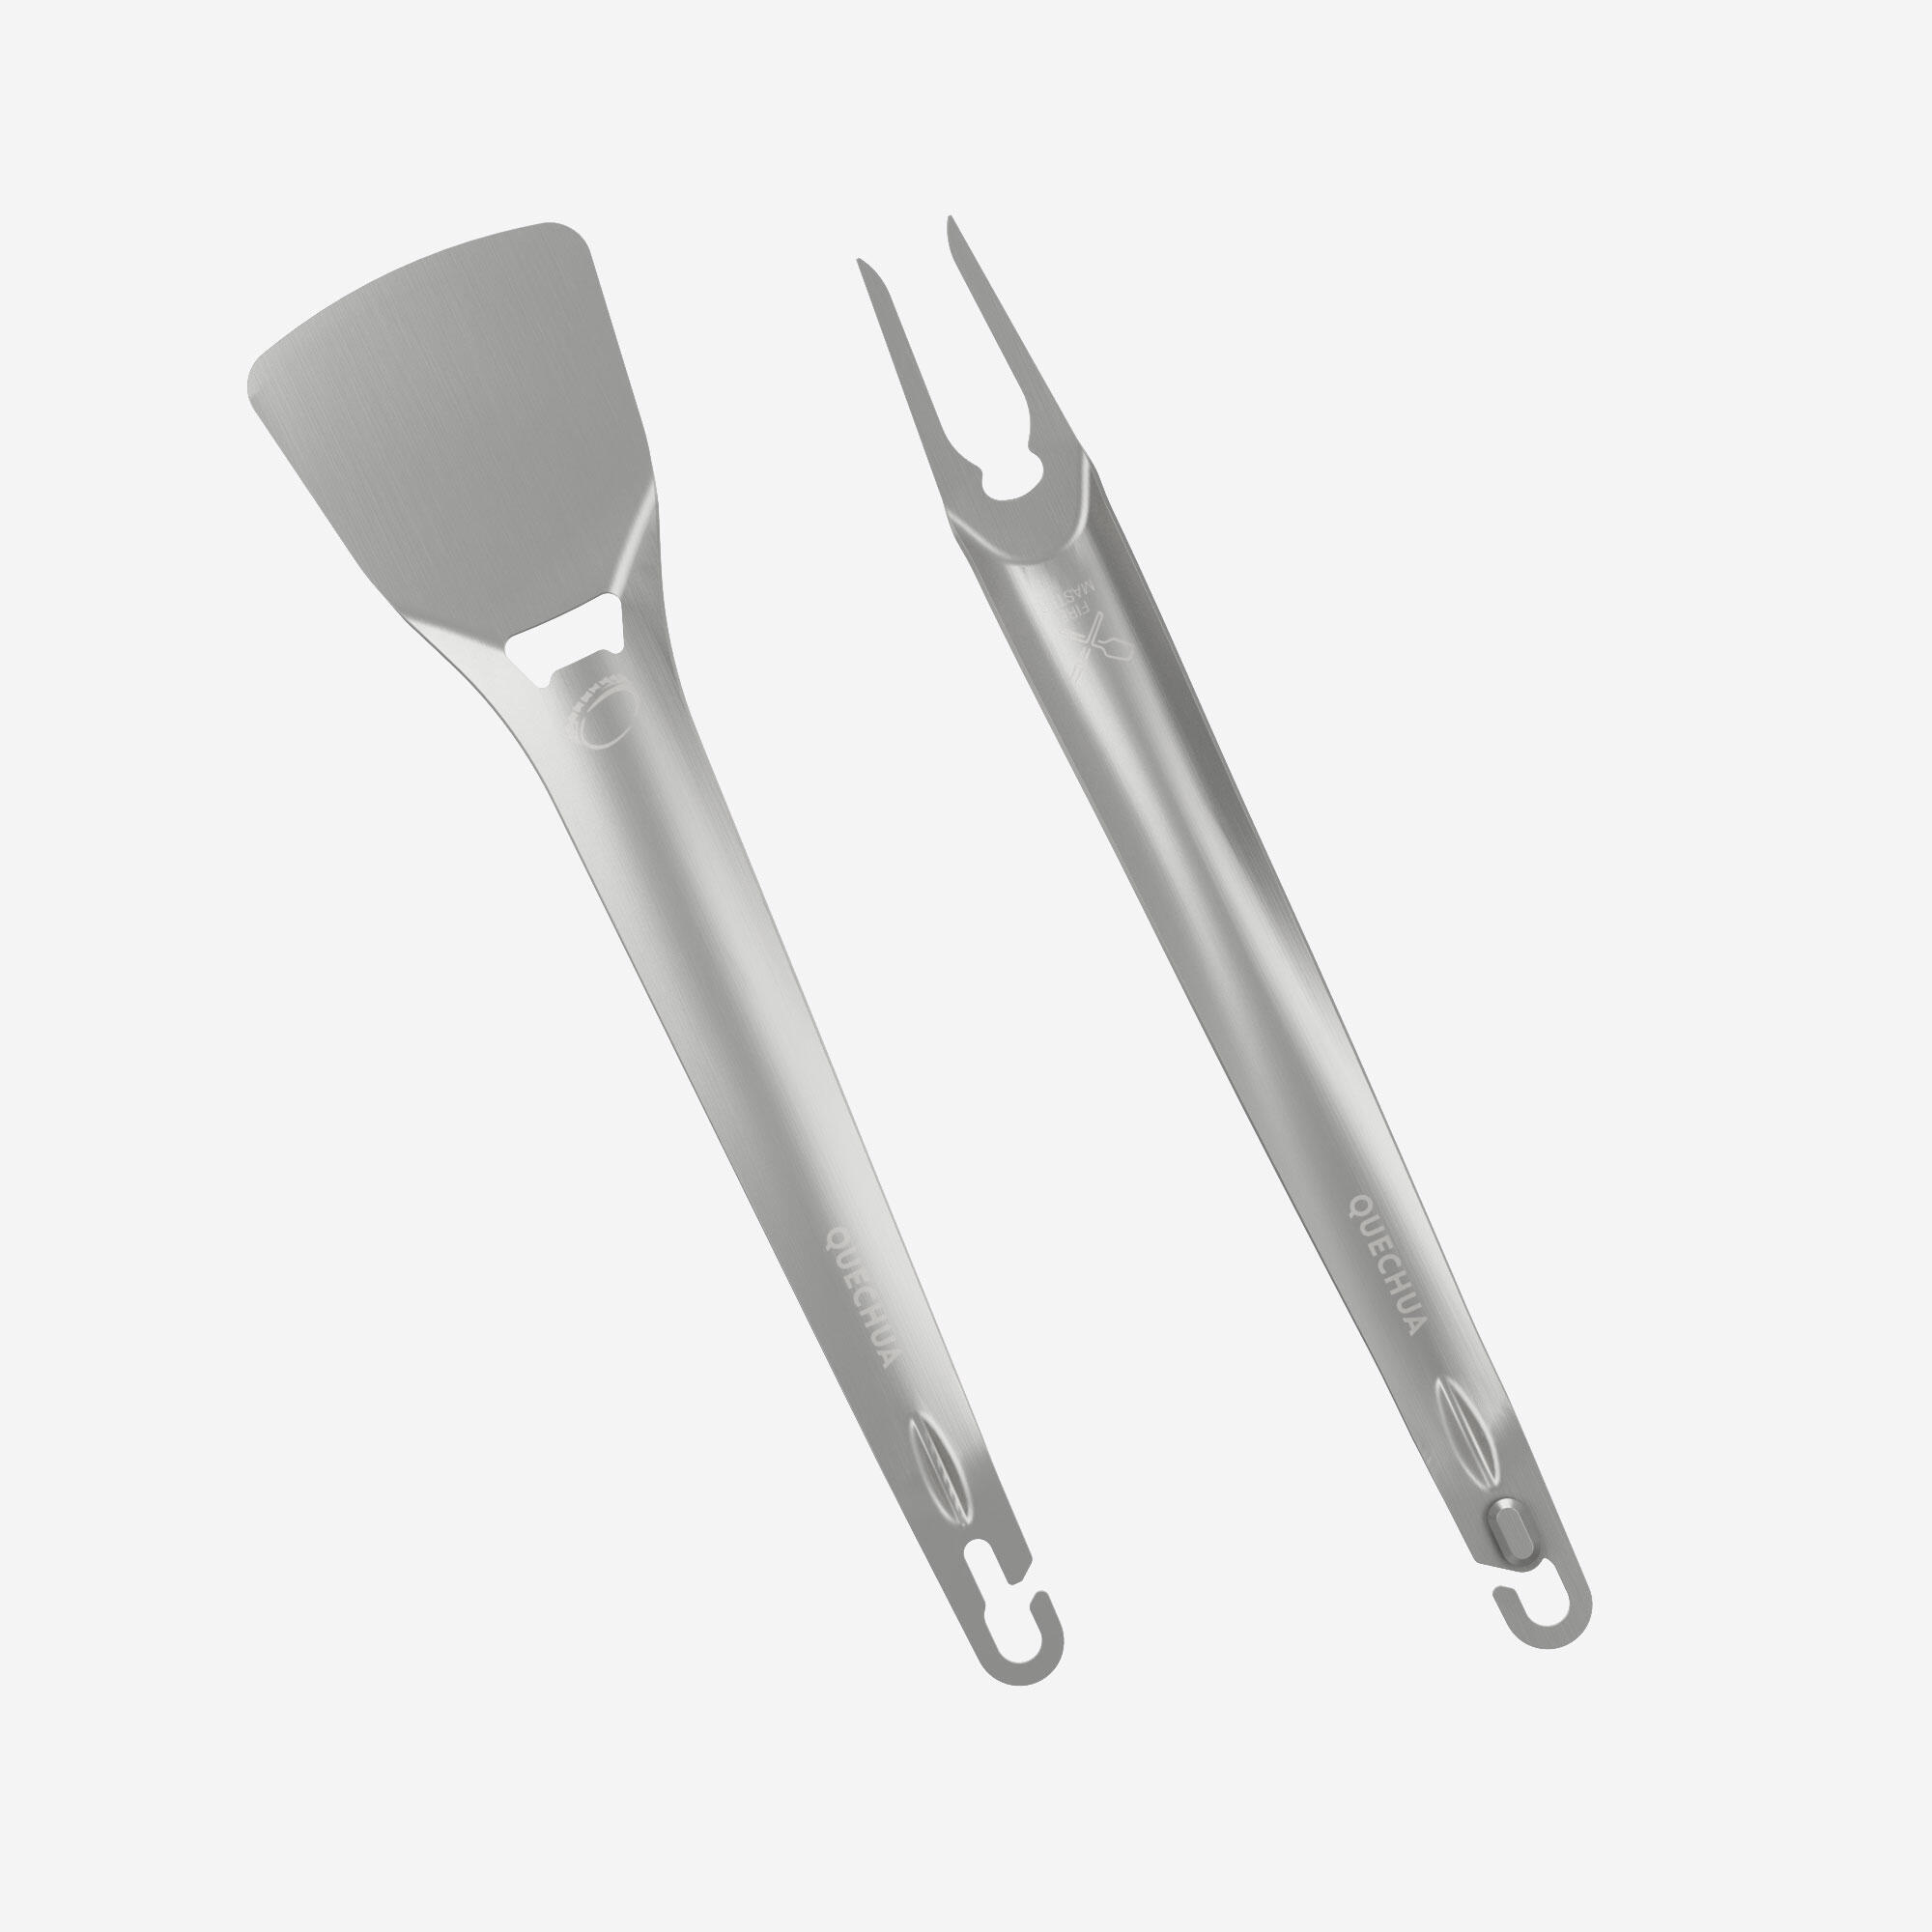 Set of 2 stainless-steel utensils, spatula and fork, for camping 5/5